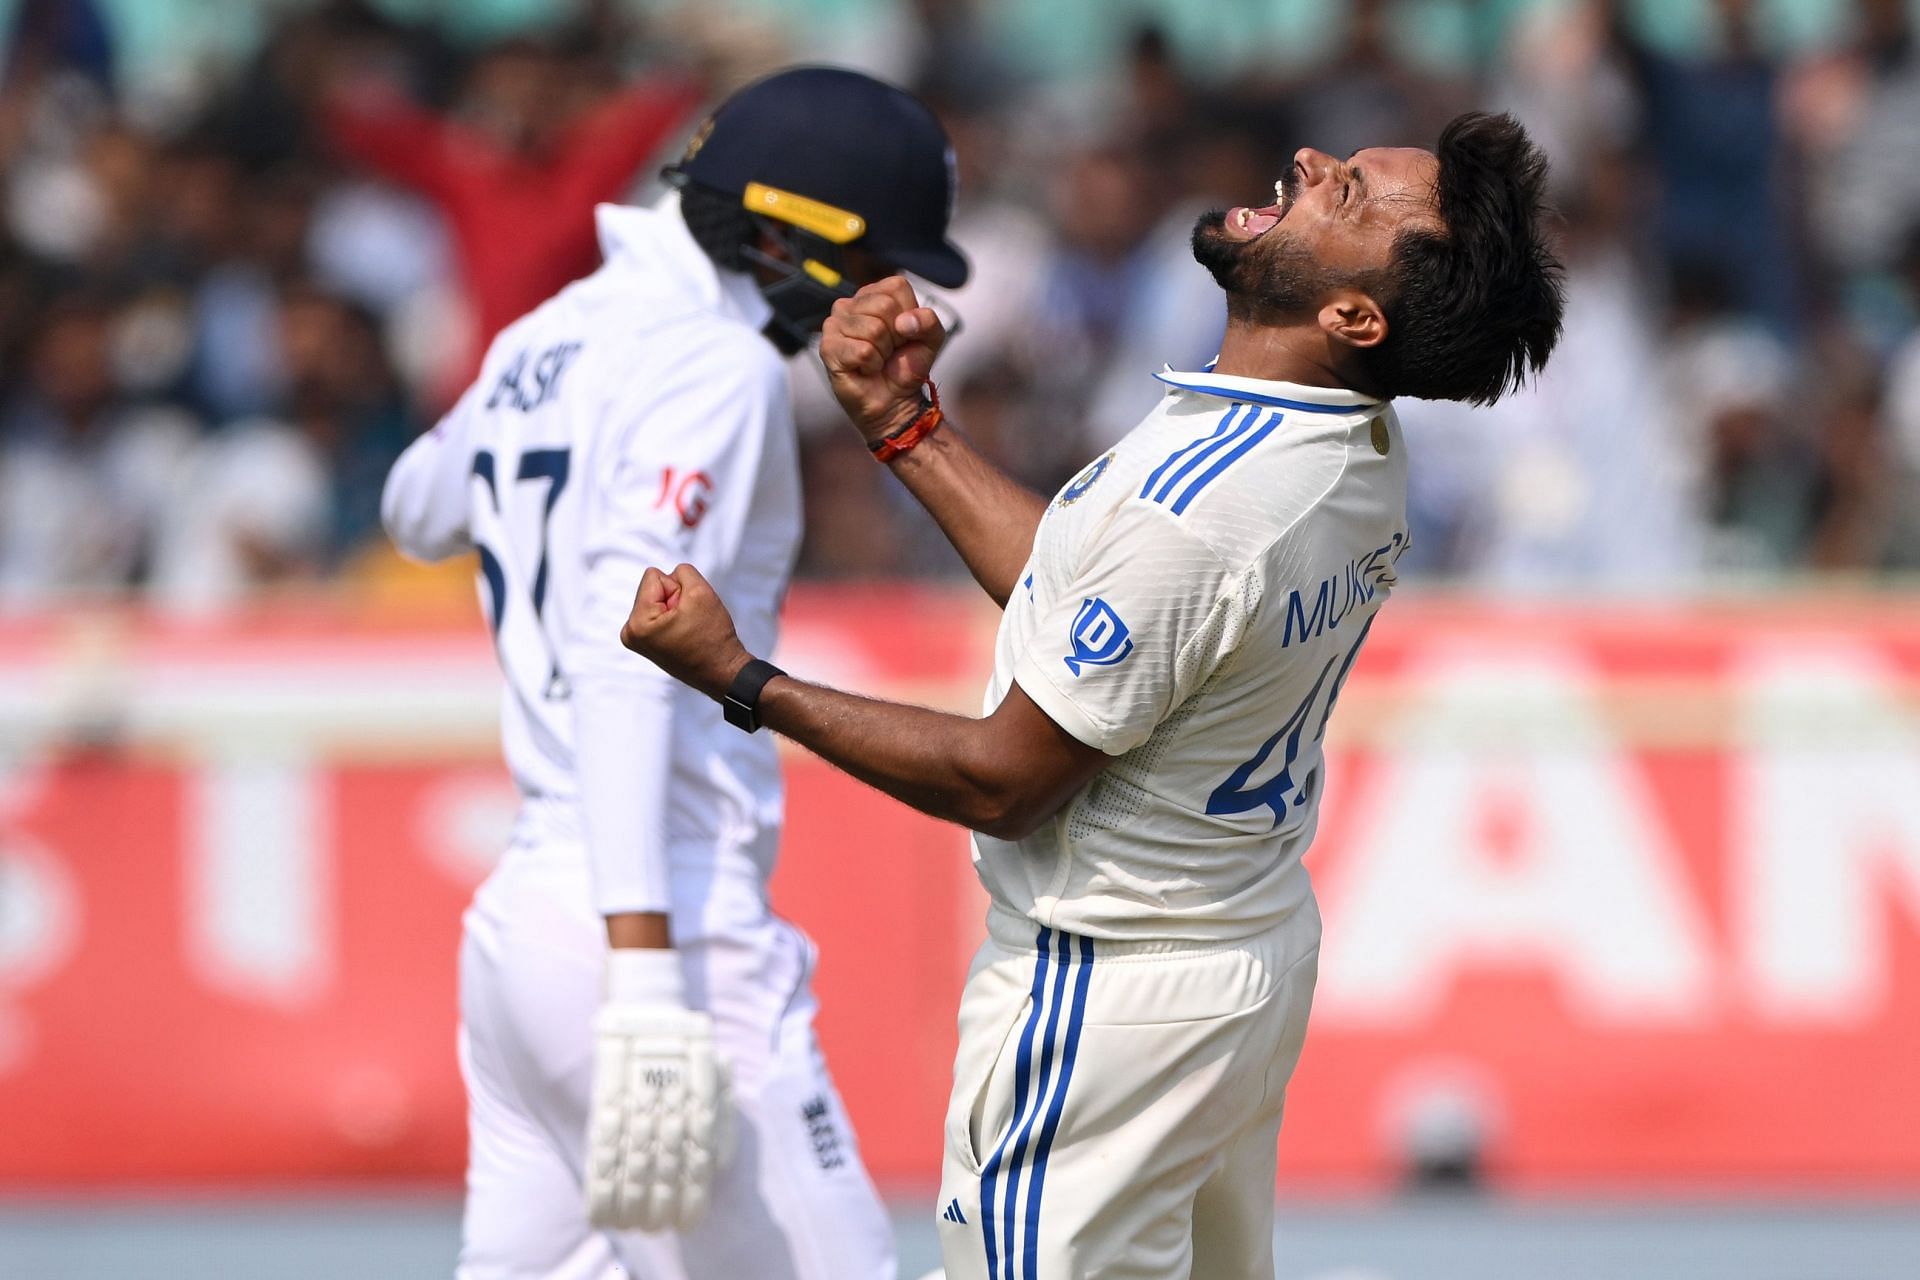 [Watch] Mukesh Kumar roars in delight after dismissing Shoaib Bashir on Day 4 of IND vs ENG 2nd Test